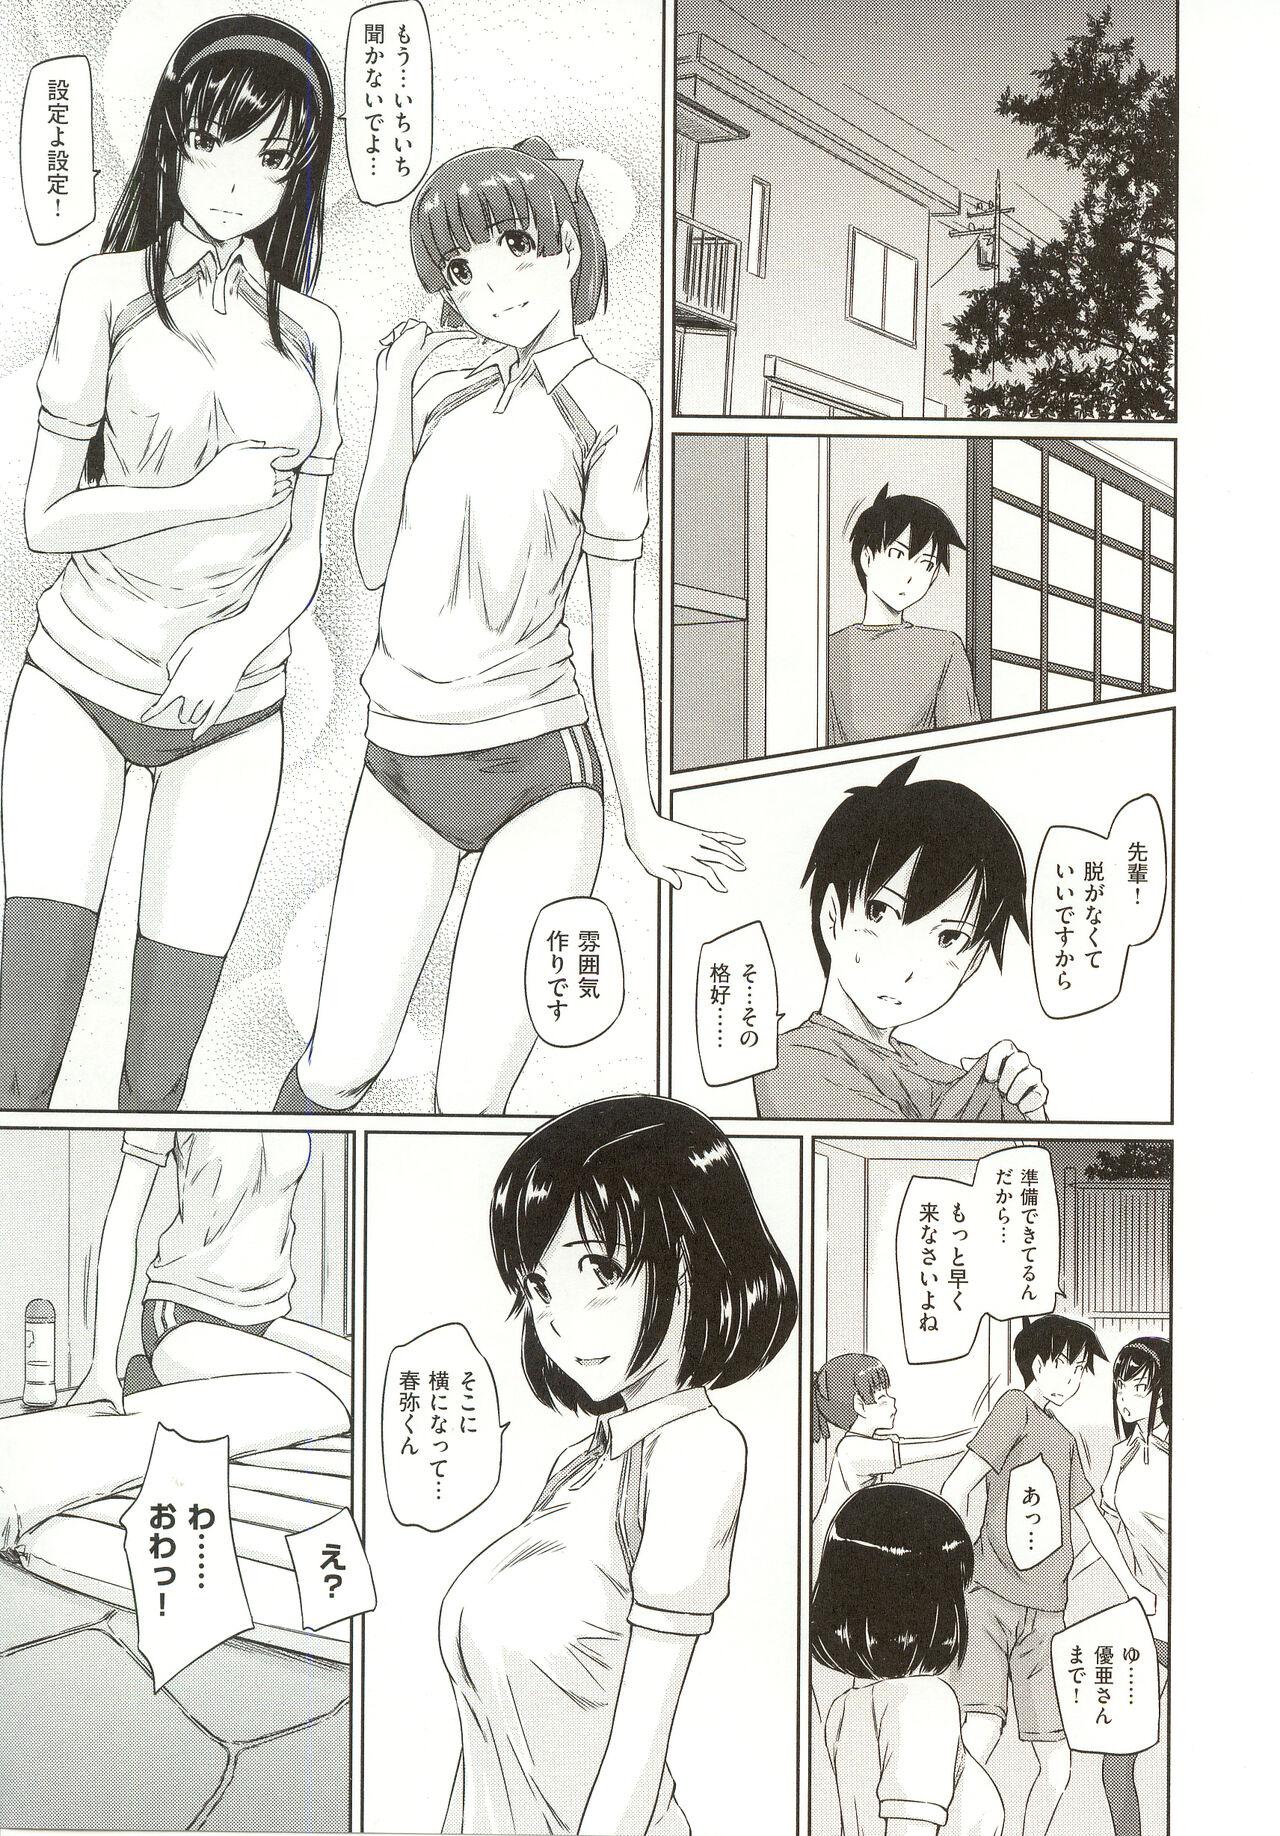 Tokoharusou e Youkoso - Welcome to the apartment of everlasting spring... come to me. 145